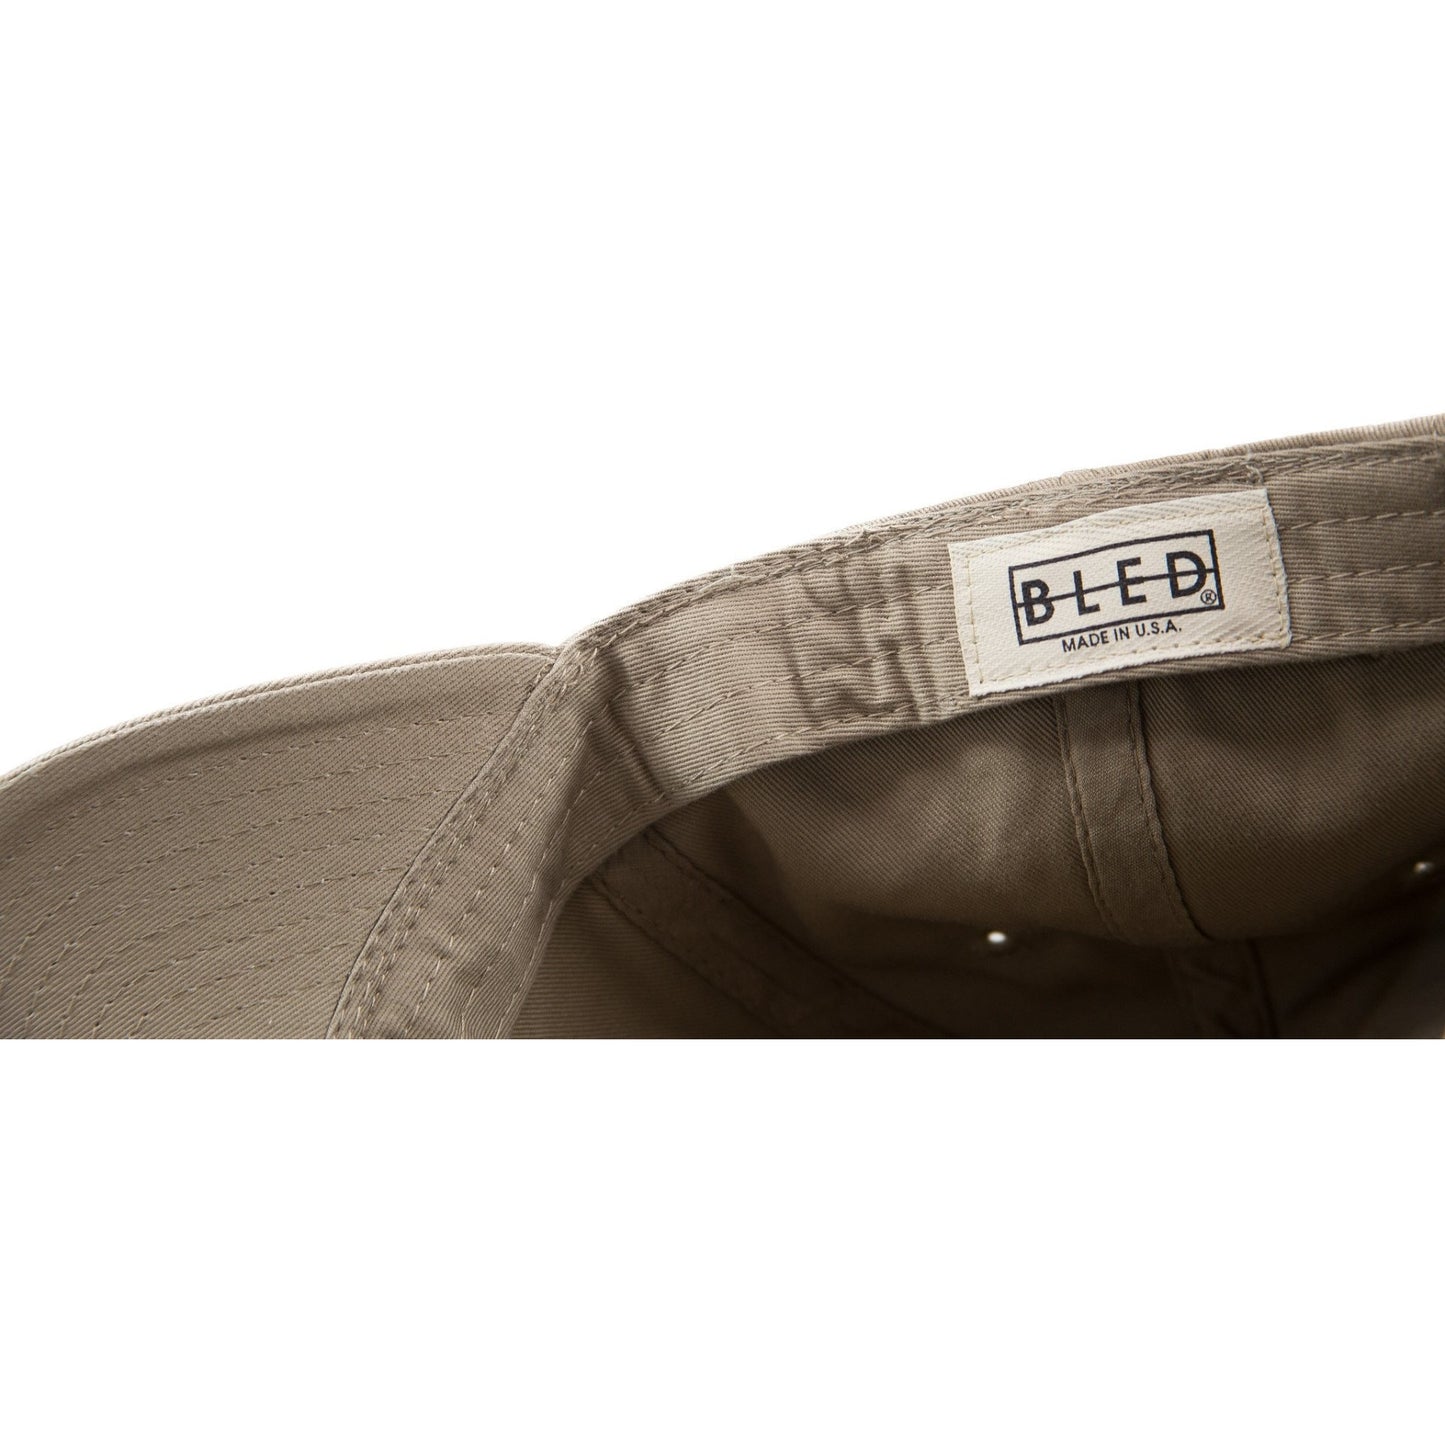 6-panel unconstructed Cotton tan beige dad hat featuring BLED letter logo felt patch on the front and BLED logo embroidered on the back with adjustable strap closure. skate, skateboarding, hype, streetwear